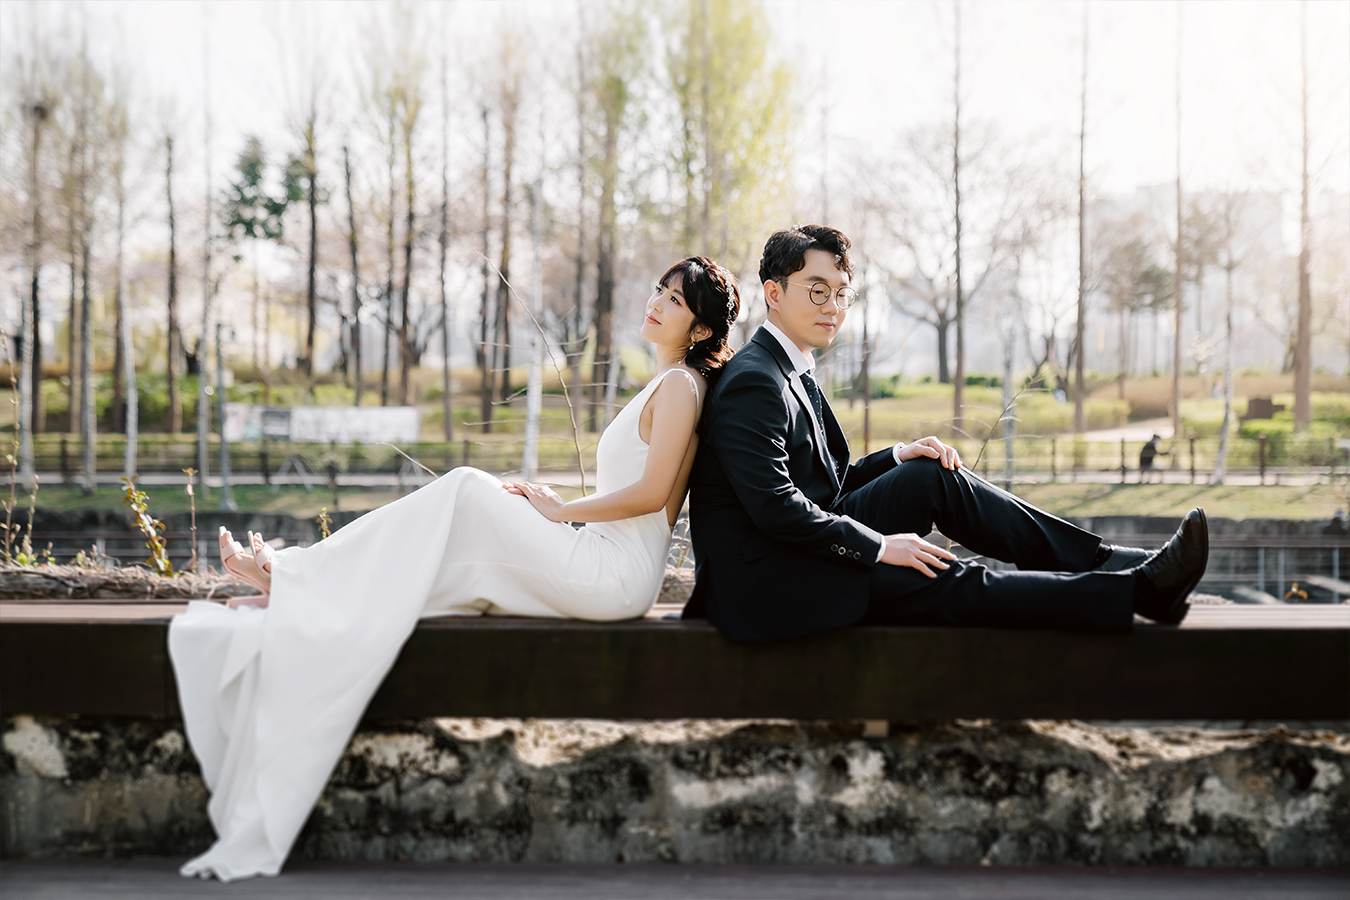 Cute Korea Pre-Wedding Photoshoot Under the Cherry Blossoms Trees by Jungyeol on OneThreeOneFour 4